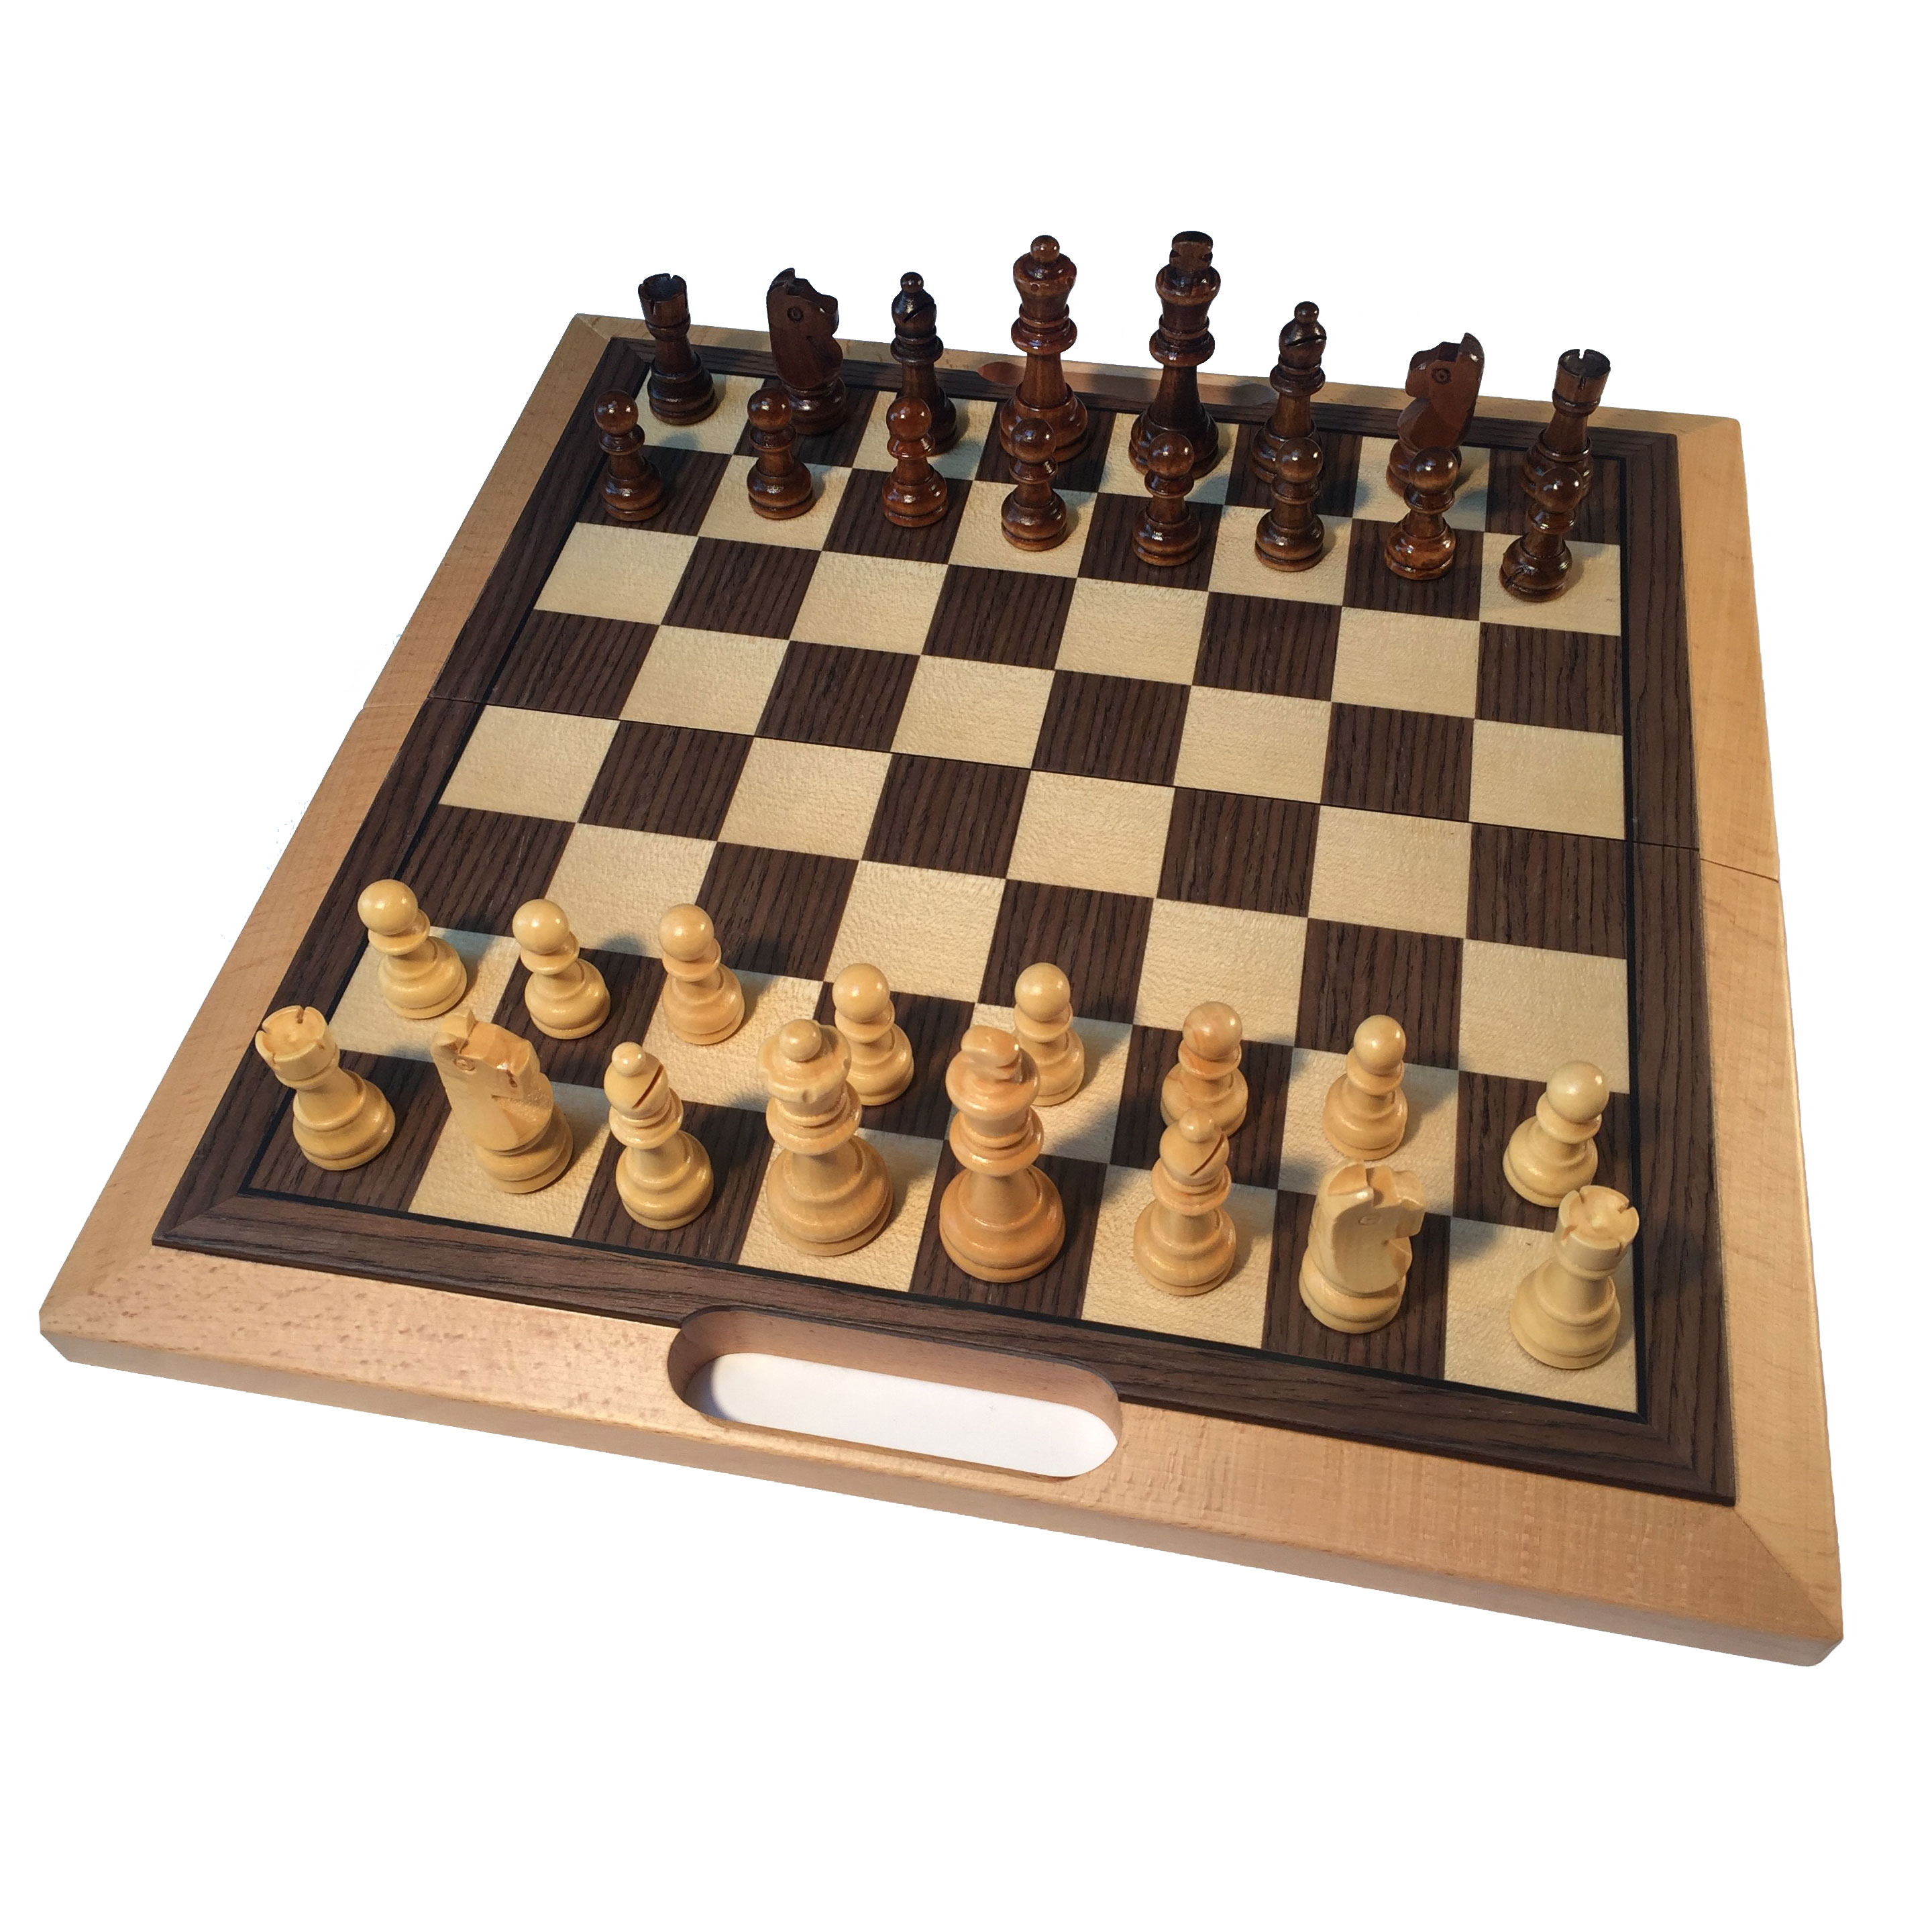 HANDMADE SOLID SHEESHAM WOOD FOLDABLE CHESS SET WITH PIECES 16" 